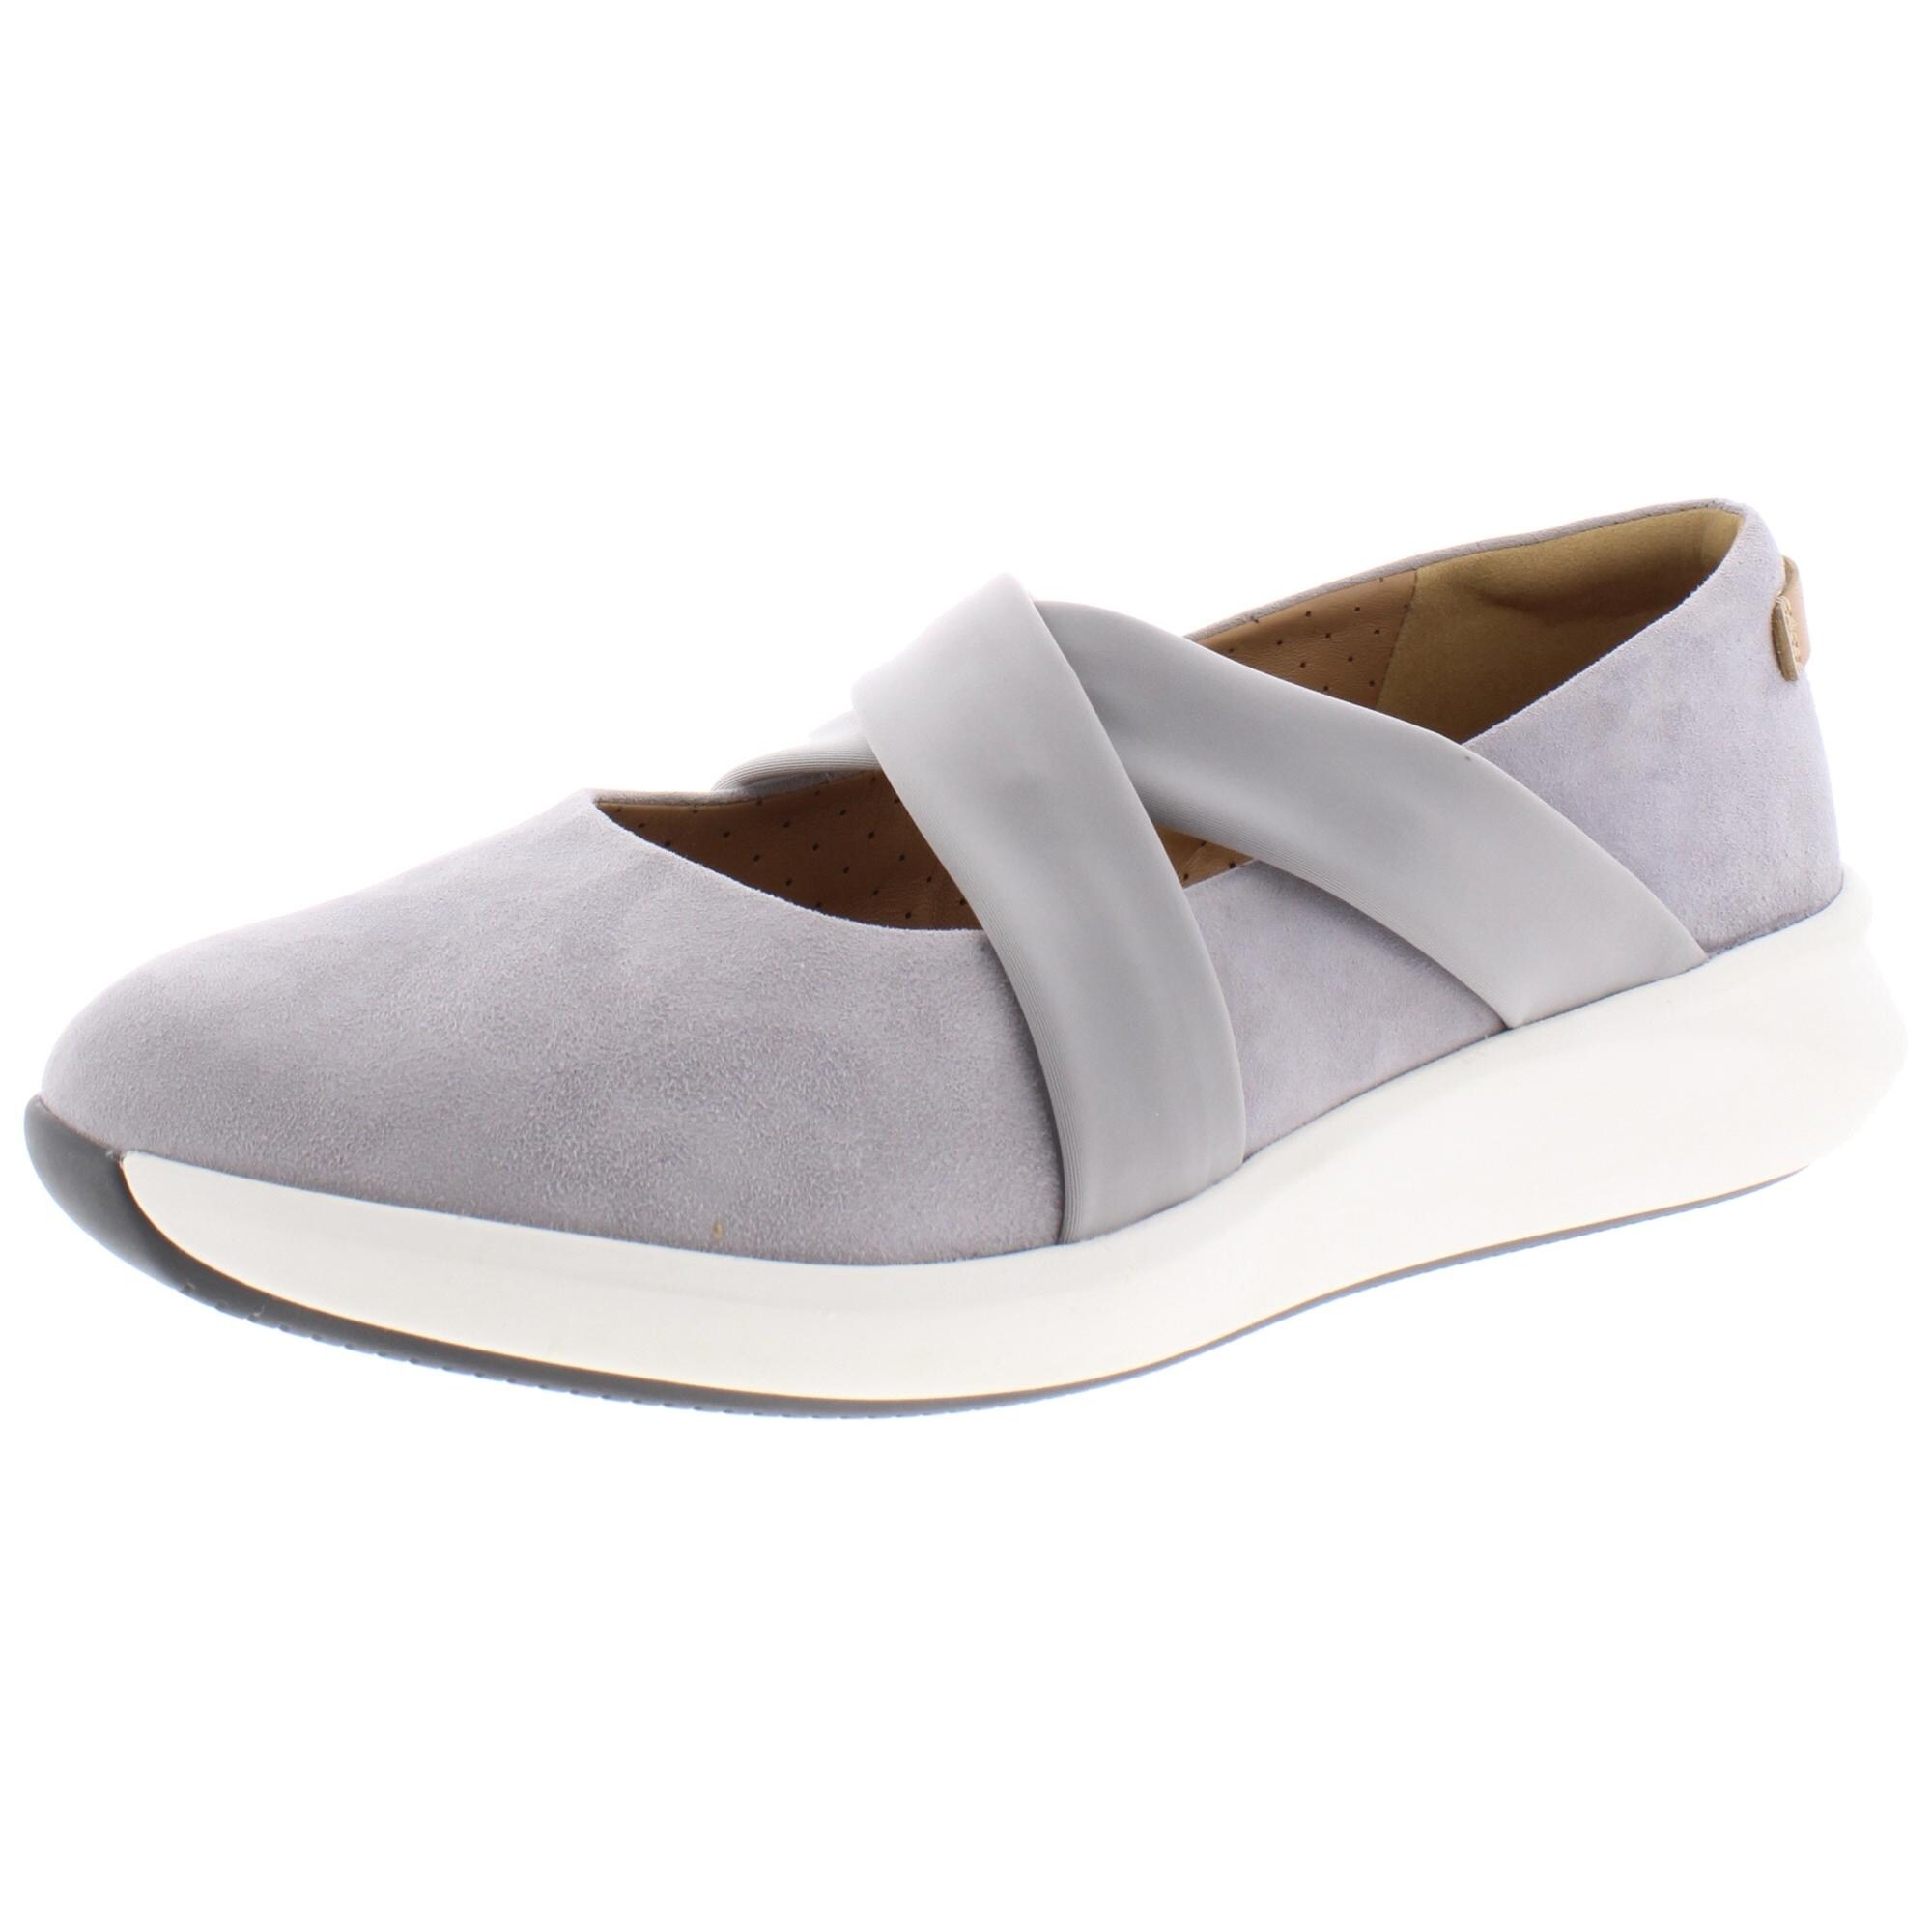 clarks shoes unstructured women's